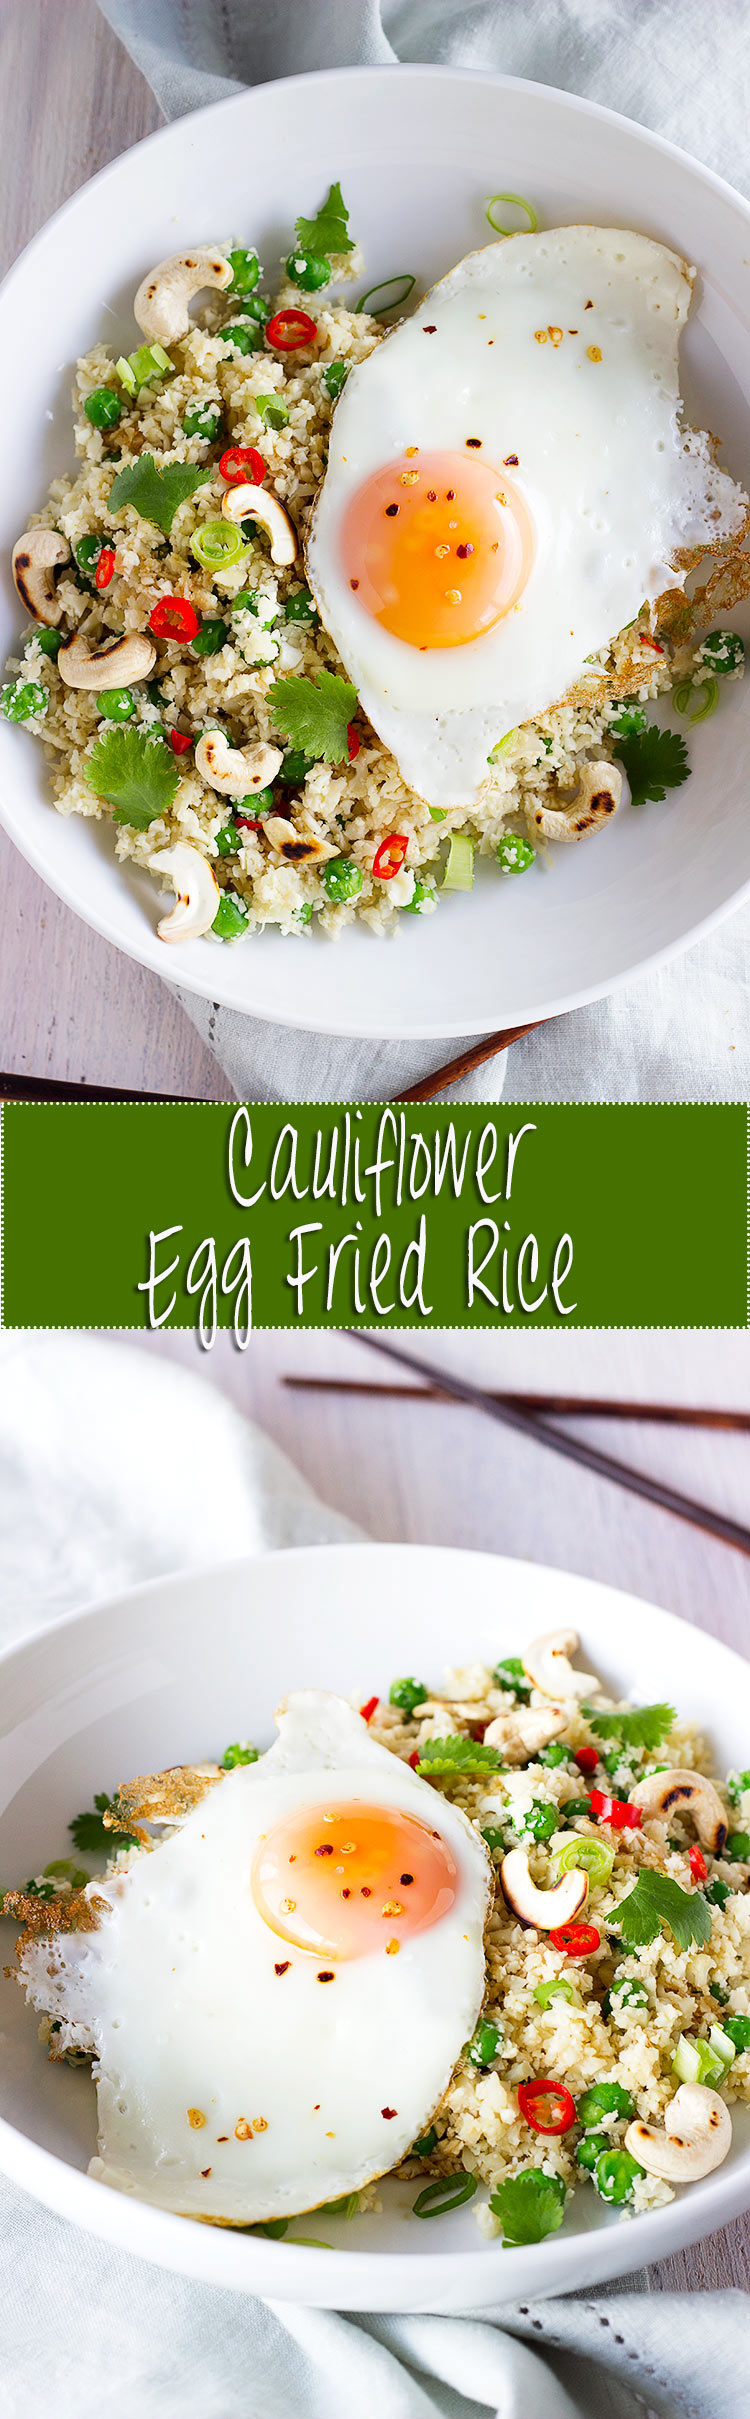 Cauliflower Egg Fried Rice | The perfect grain-free and low carb version that doesn't compromise on taste!